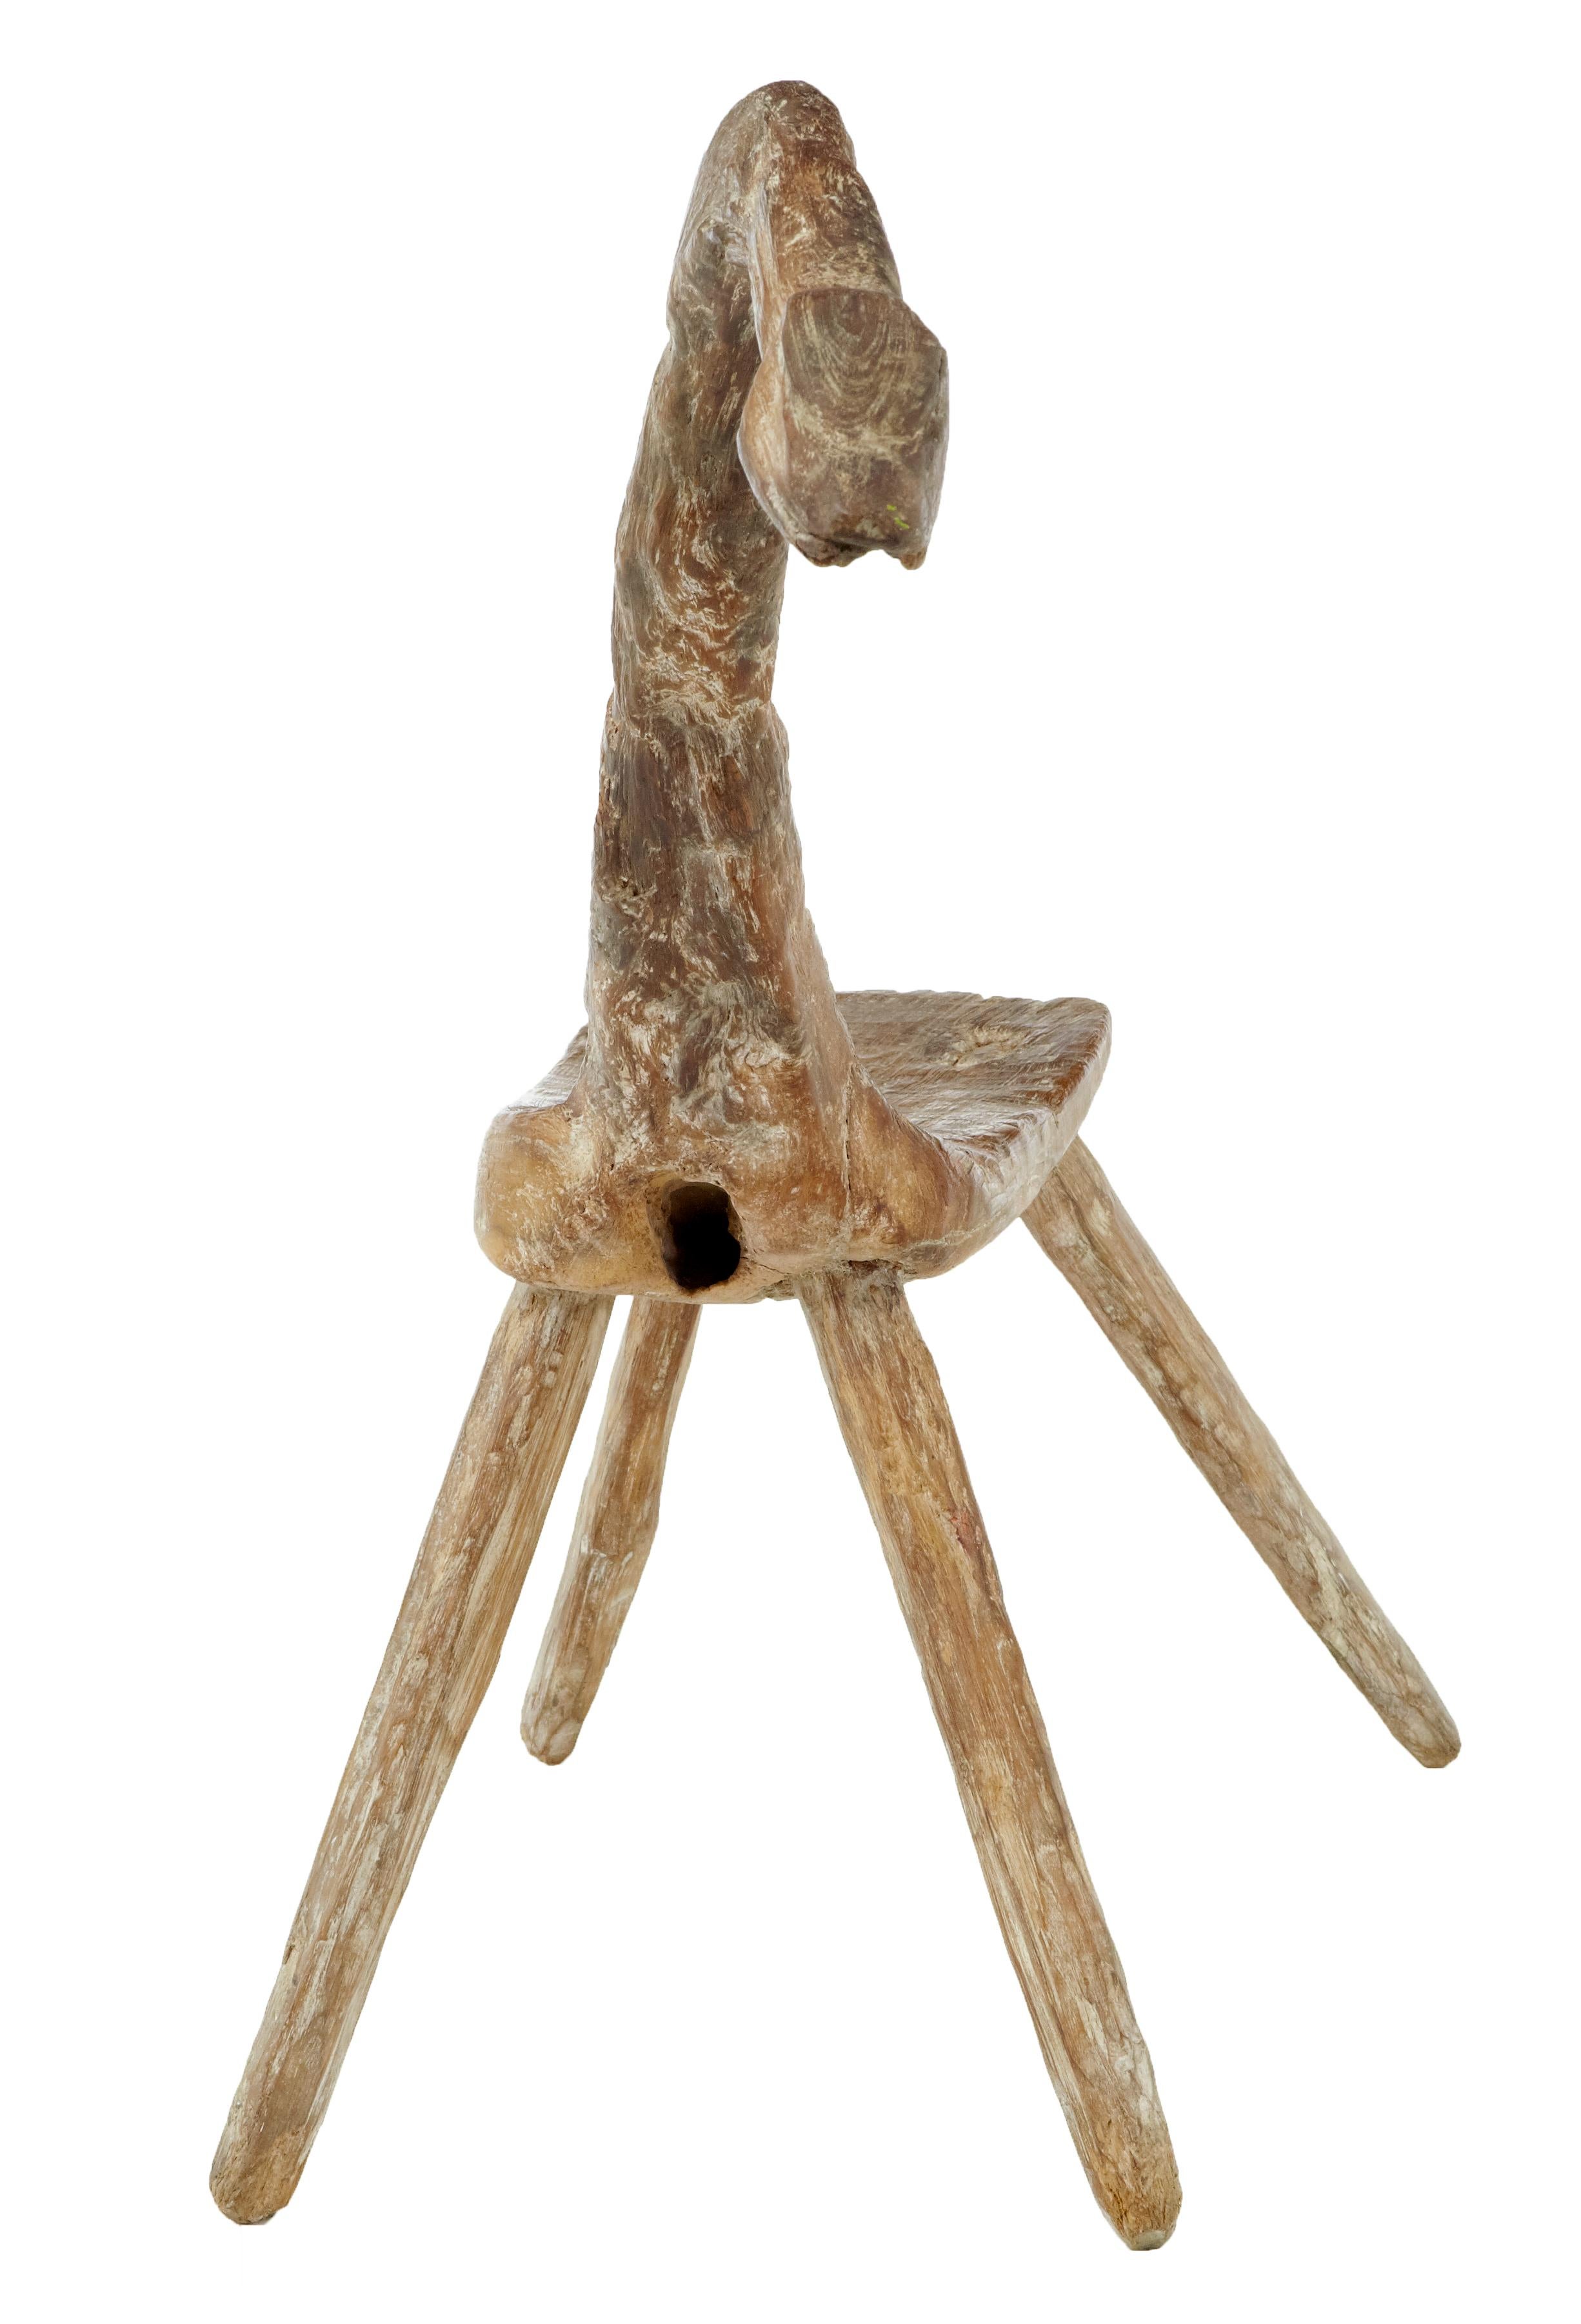 Unique 19th century natural form oak child’s stool, circa 1880.

Rare children's stool in the form of a long necked bird, horse or dinosaur, made from oak in its natural shape, with doweled in legs.

Expected surface marks.

Measures: Seat